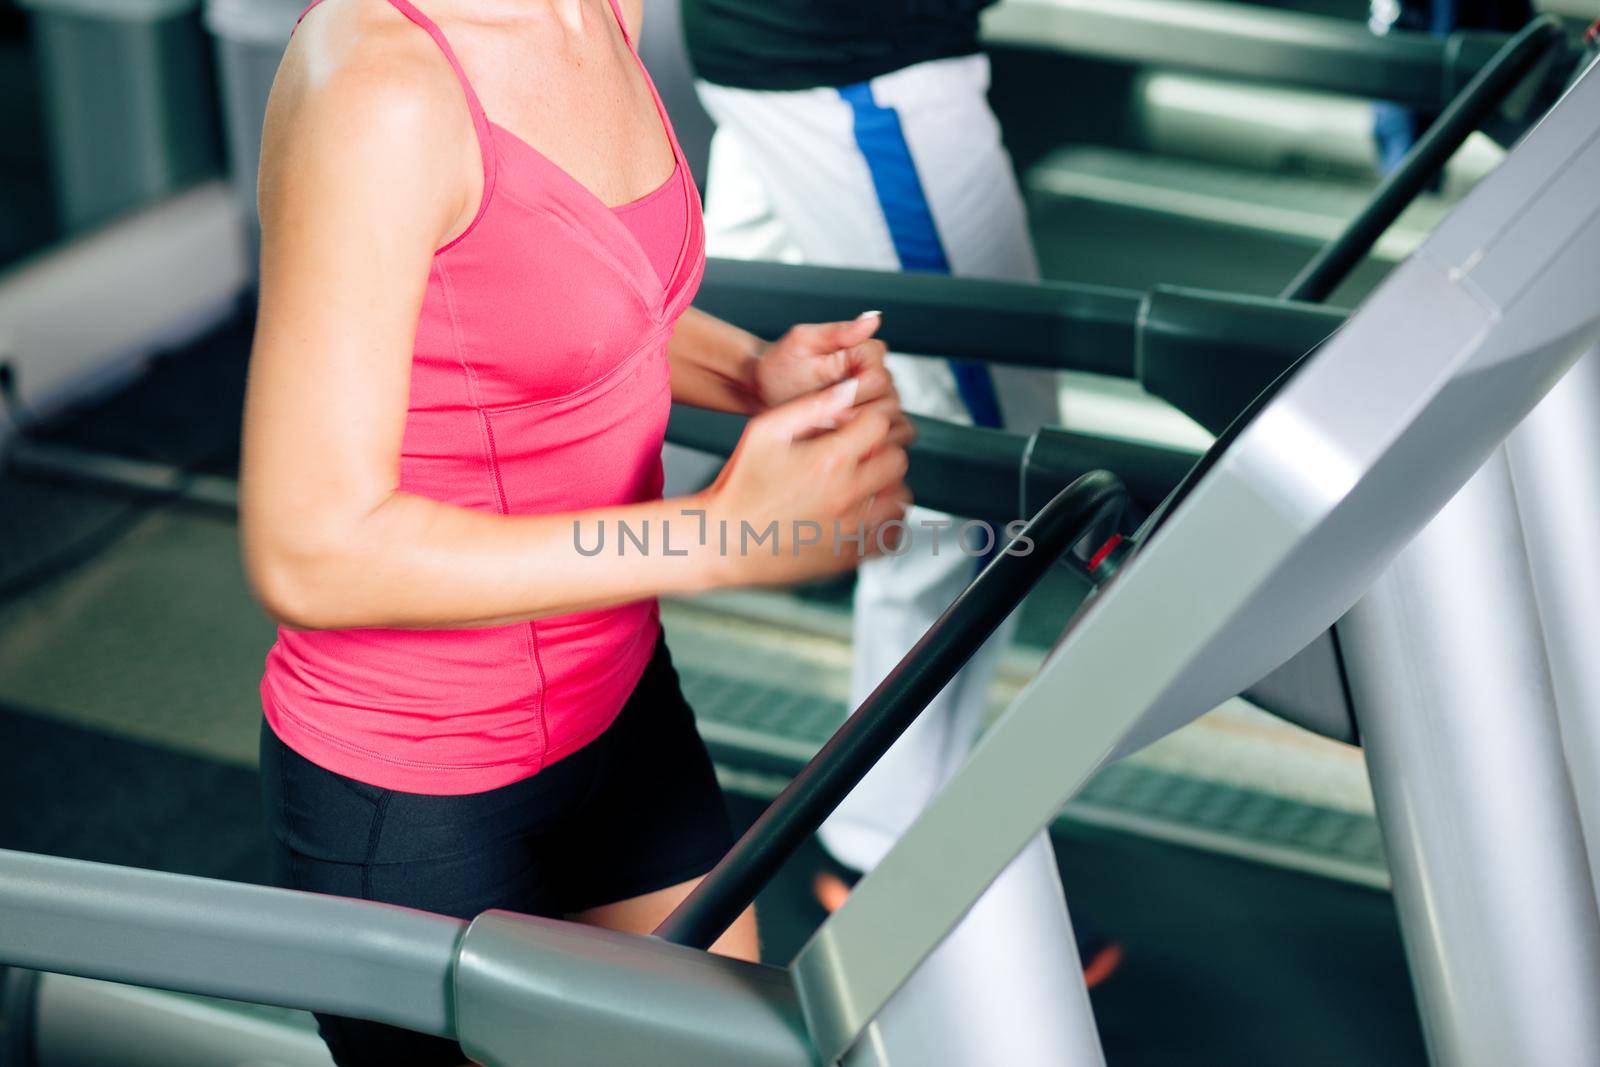 Woman and man in gym - only body to be seen - exercising running on the treadmill to gain more fitness; motion blur in limbs for dynamic